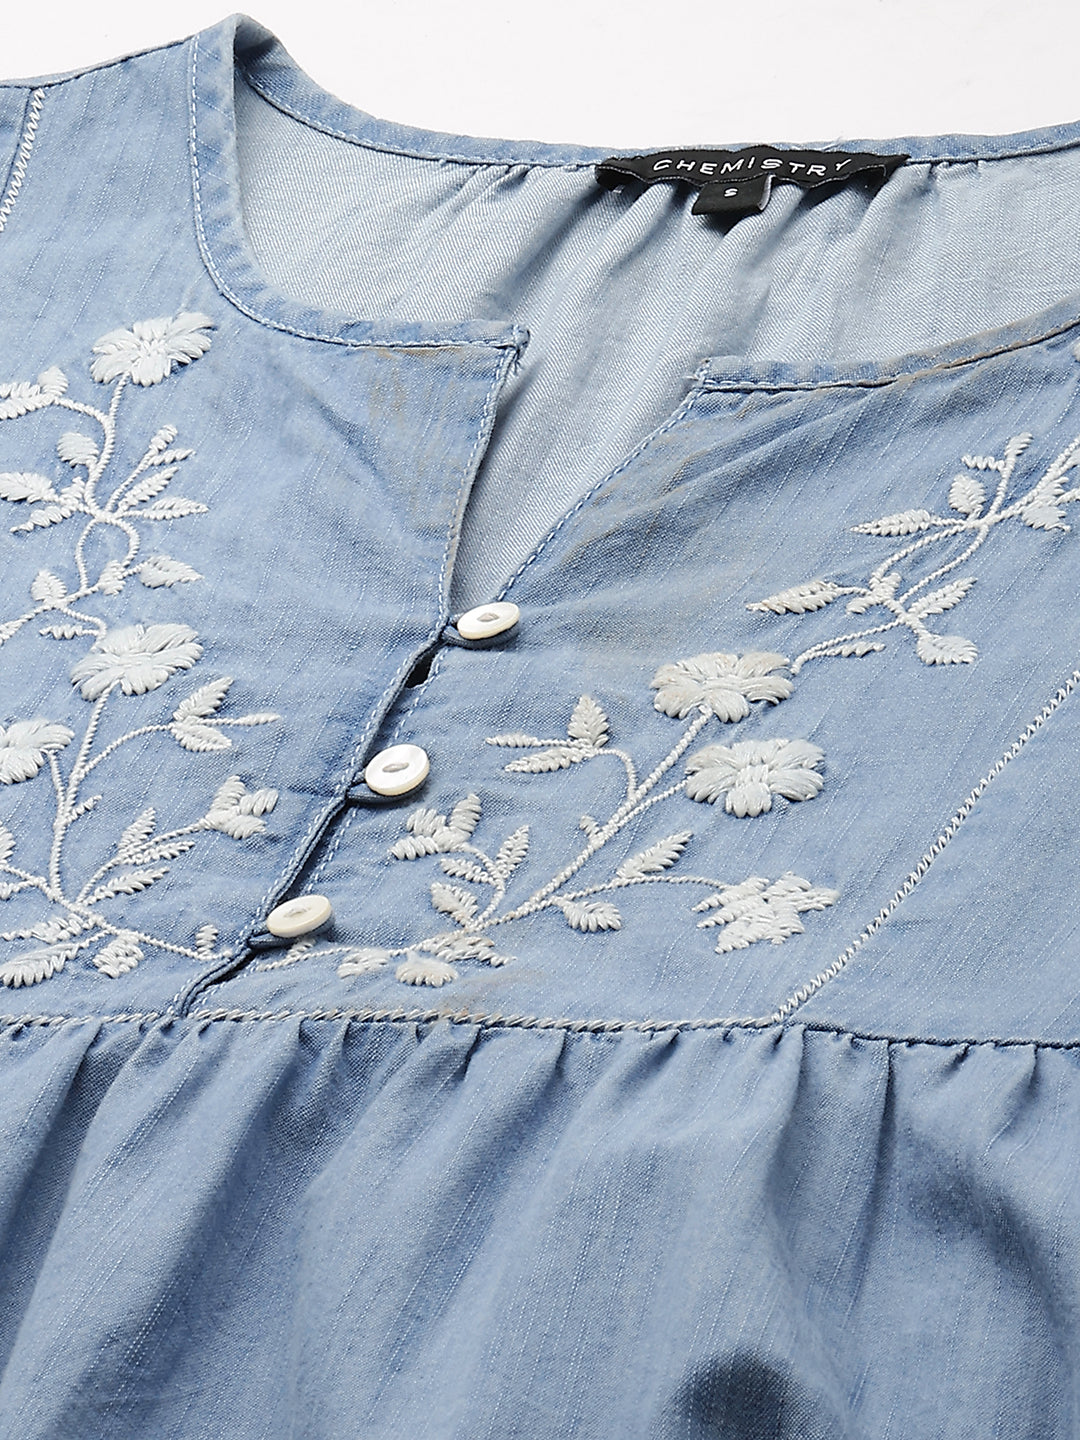 Light Weight Denim Tiered Dress With Embroidered Yoke